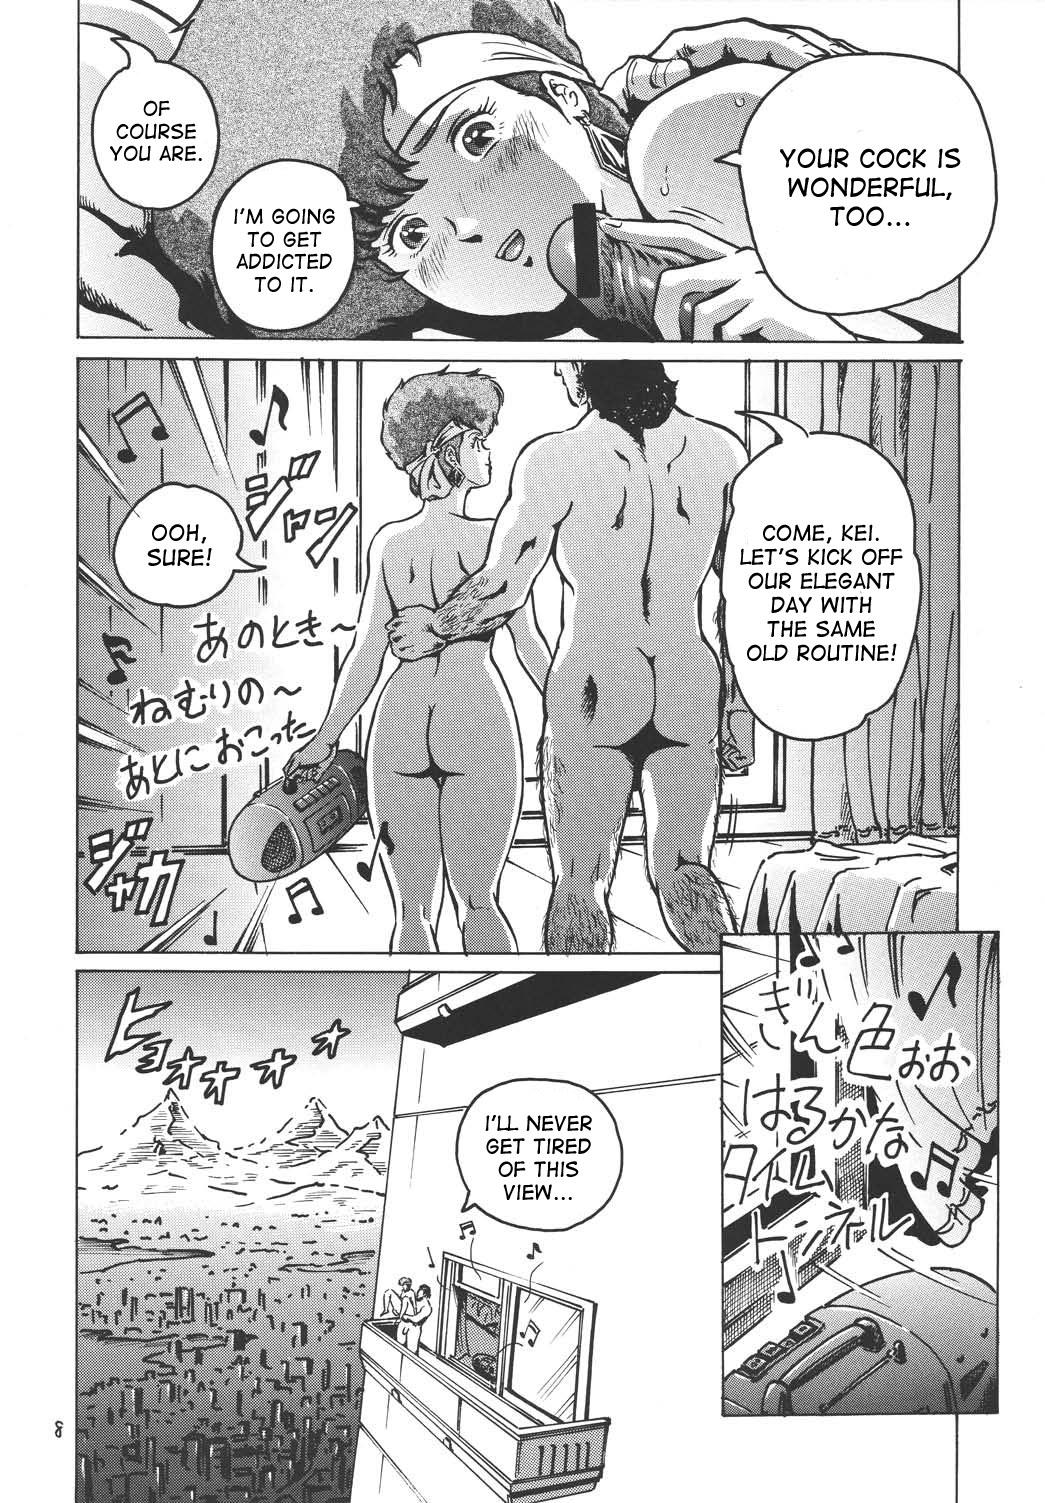 Lez Love Angel - Dirty pair Private - Page 7